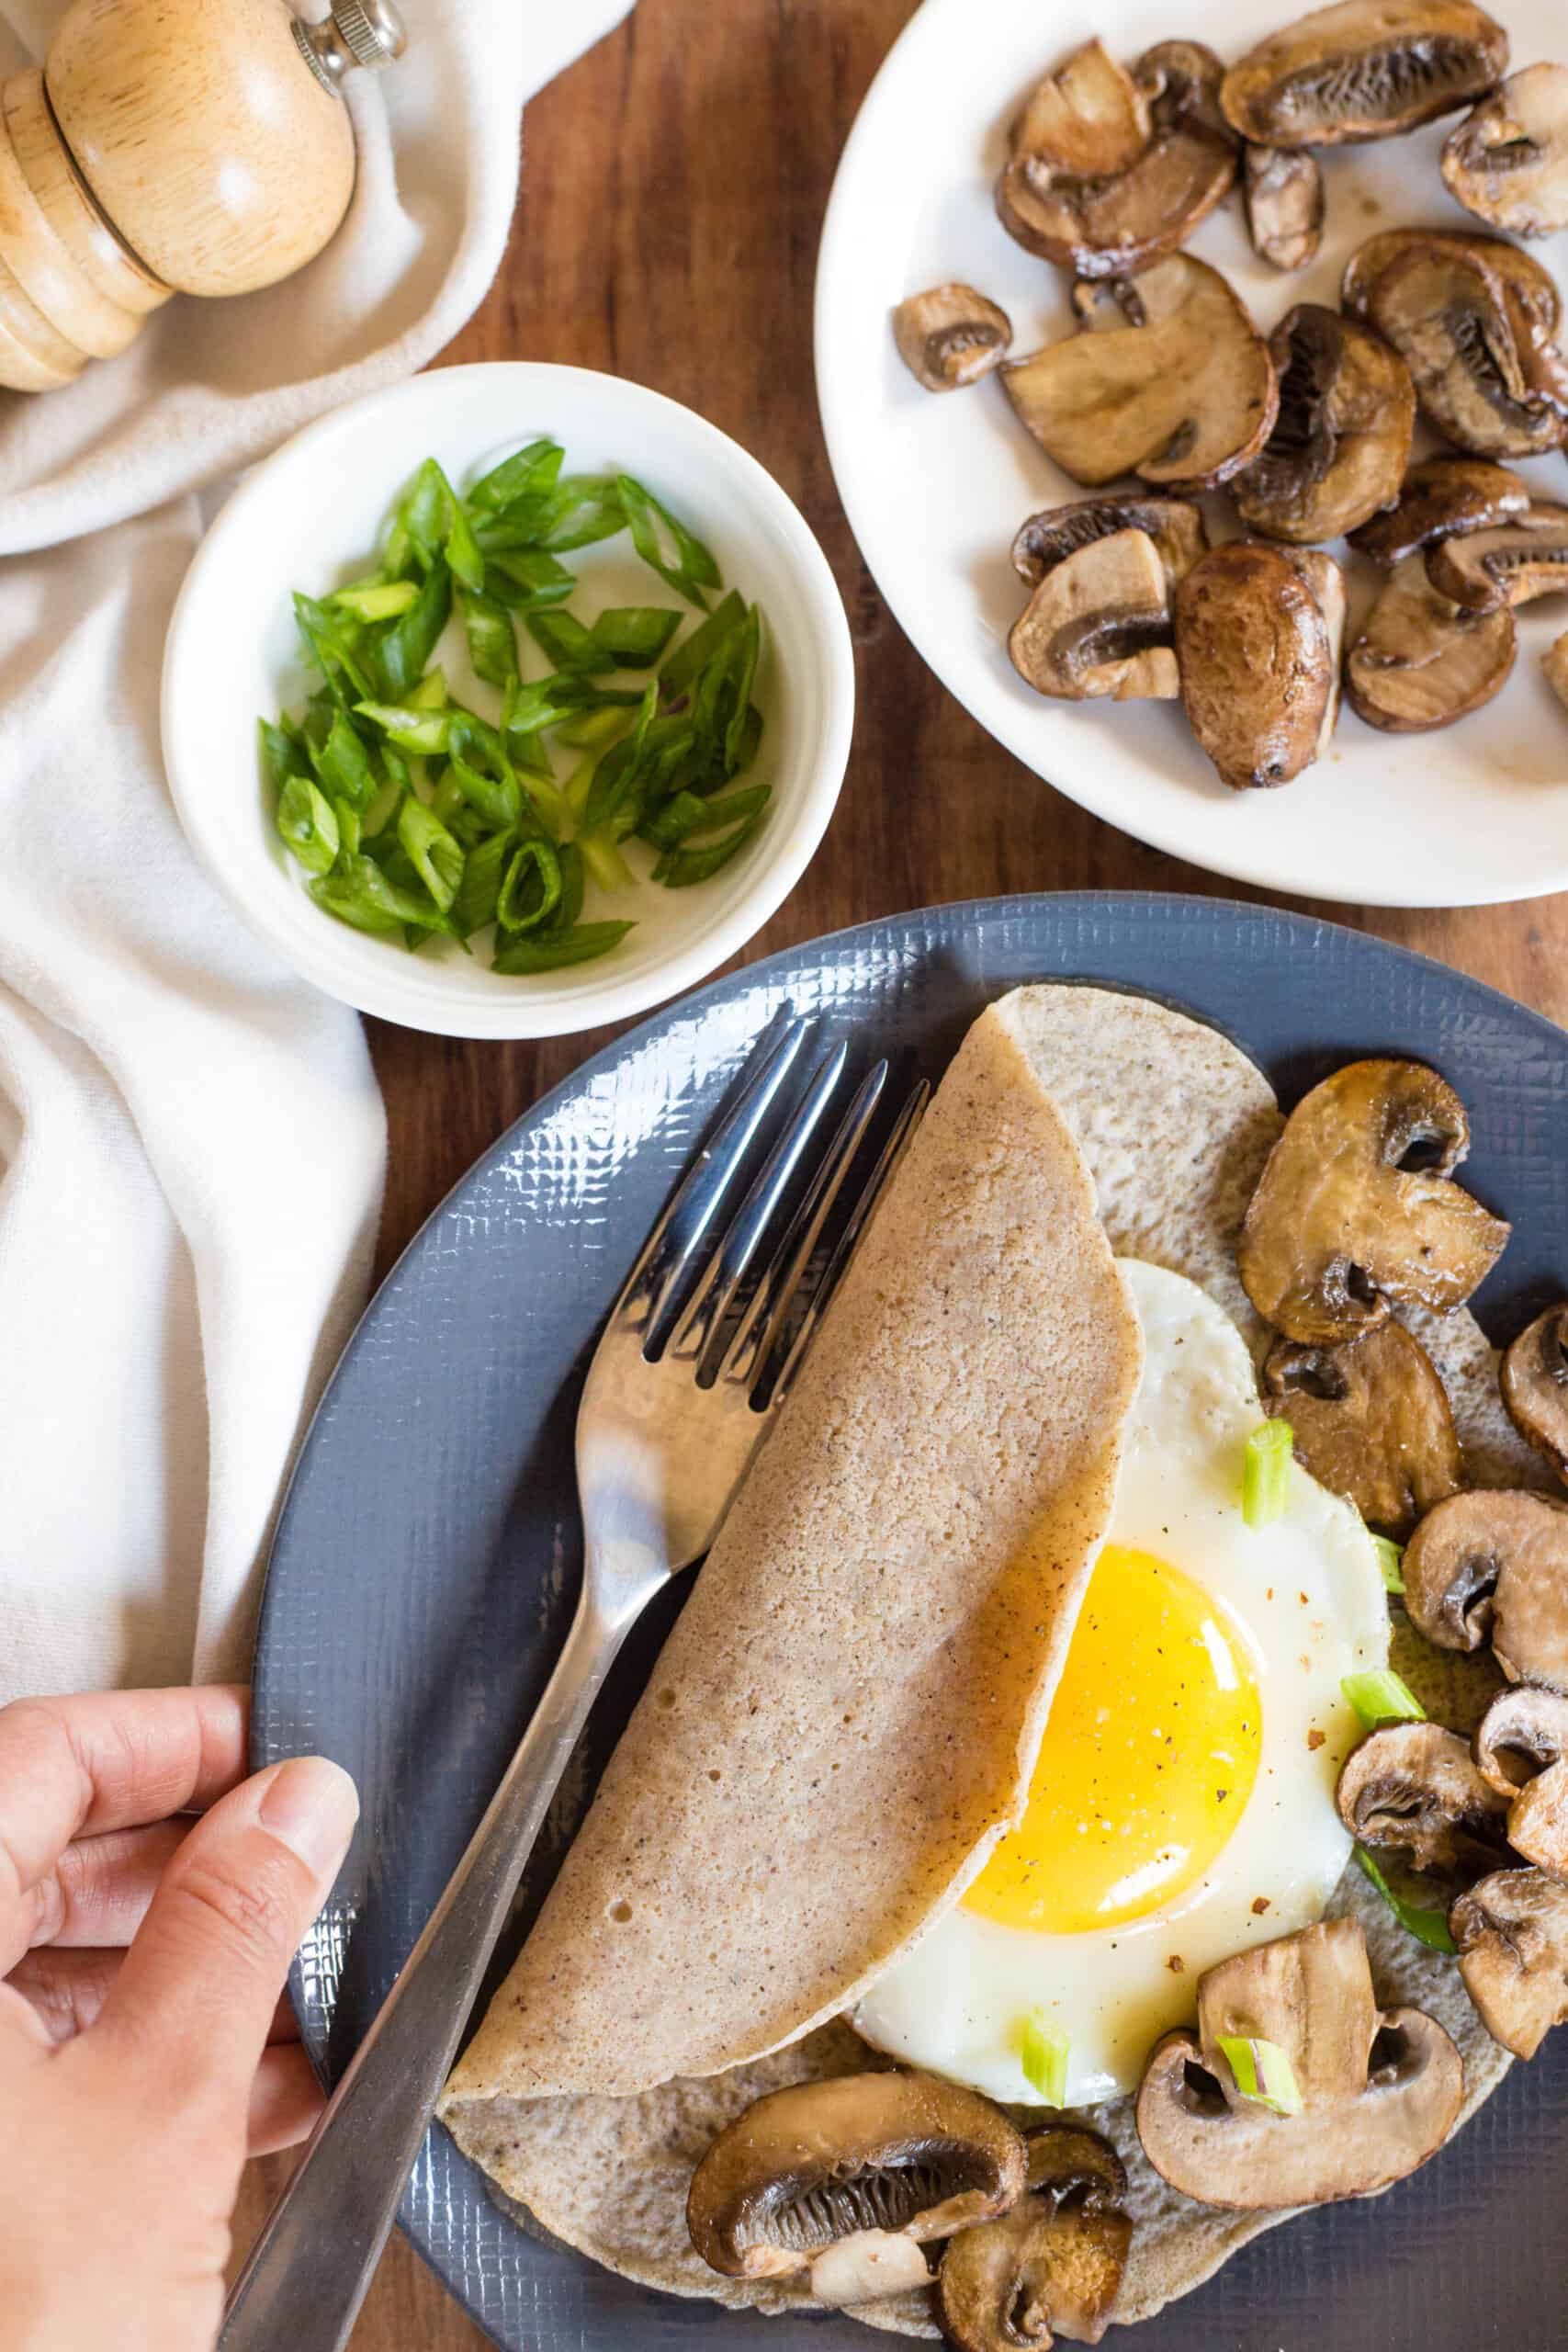 Holding a plate with a savory buckwheat crepe filled with an egg and mushrooms.